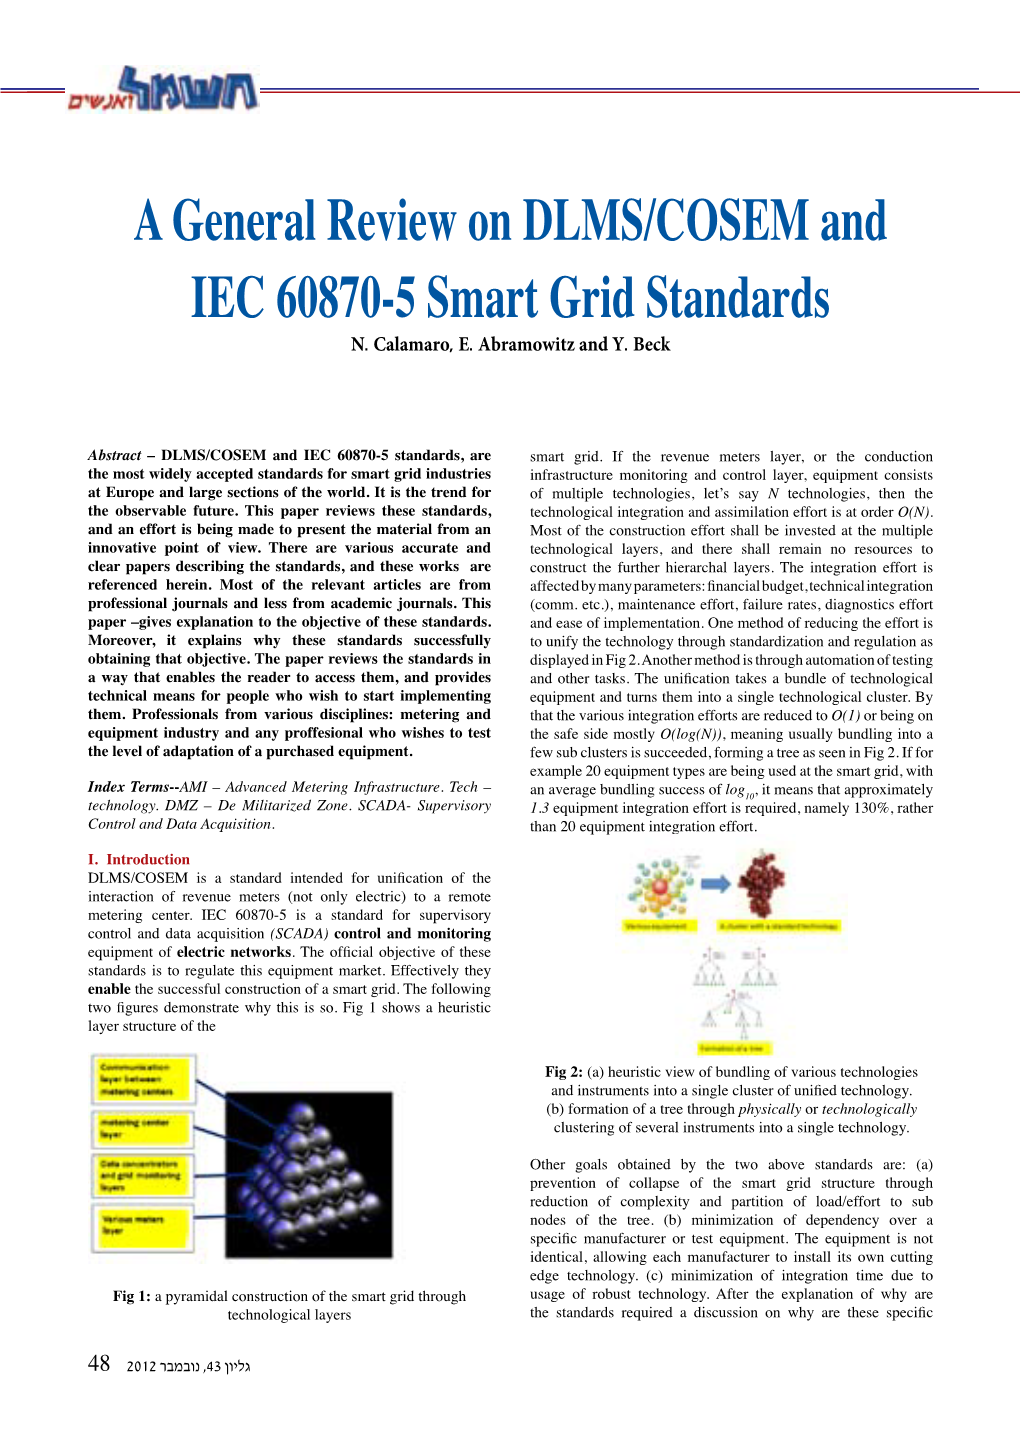 A General Review on DLMS/COSEM and IEC 60870-5 Smart Grid Standards N